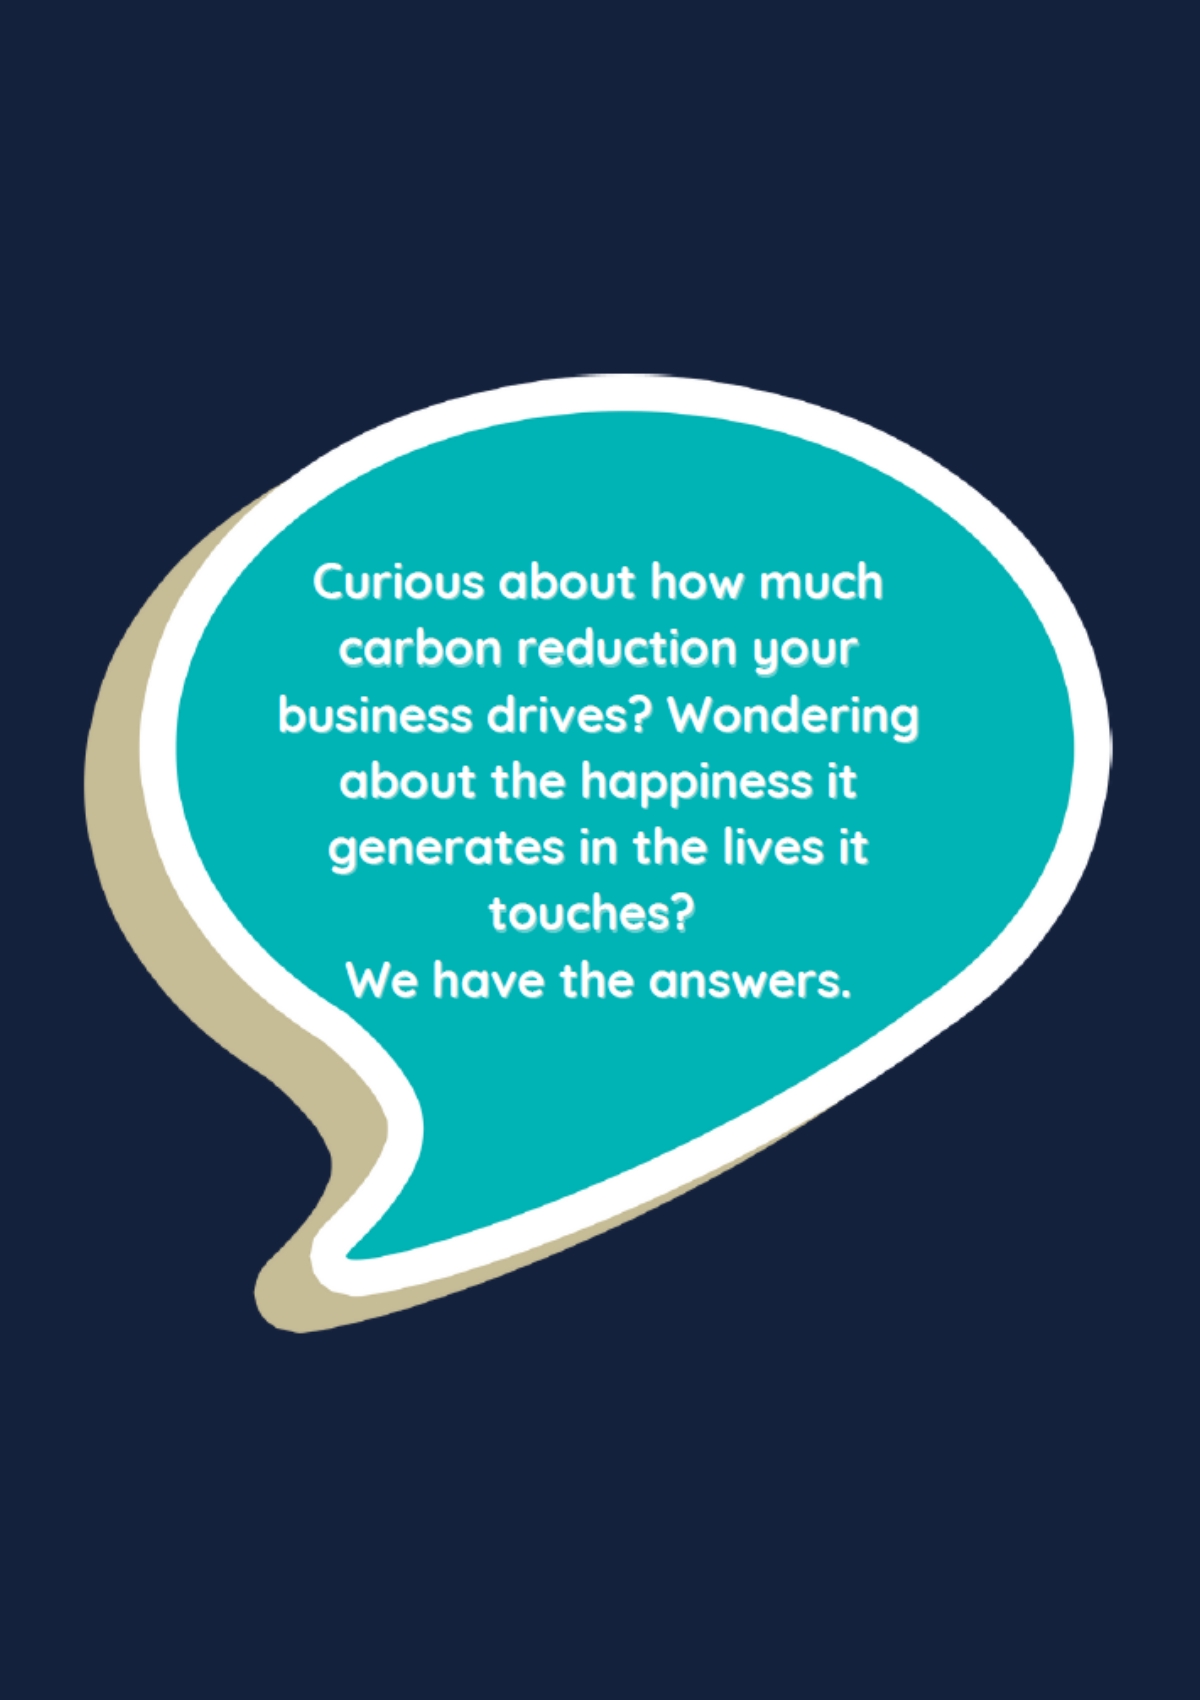 how much carbon reduction your business drives?